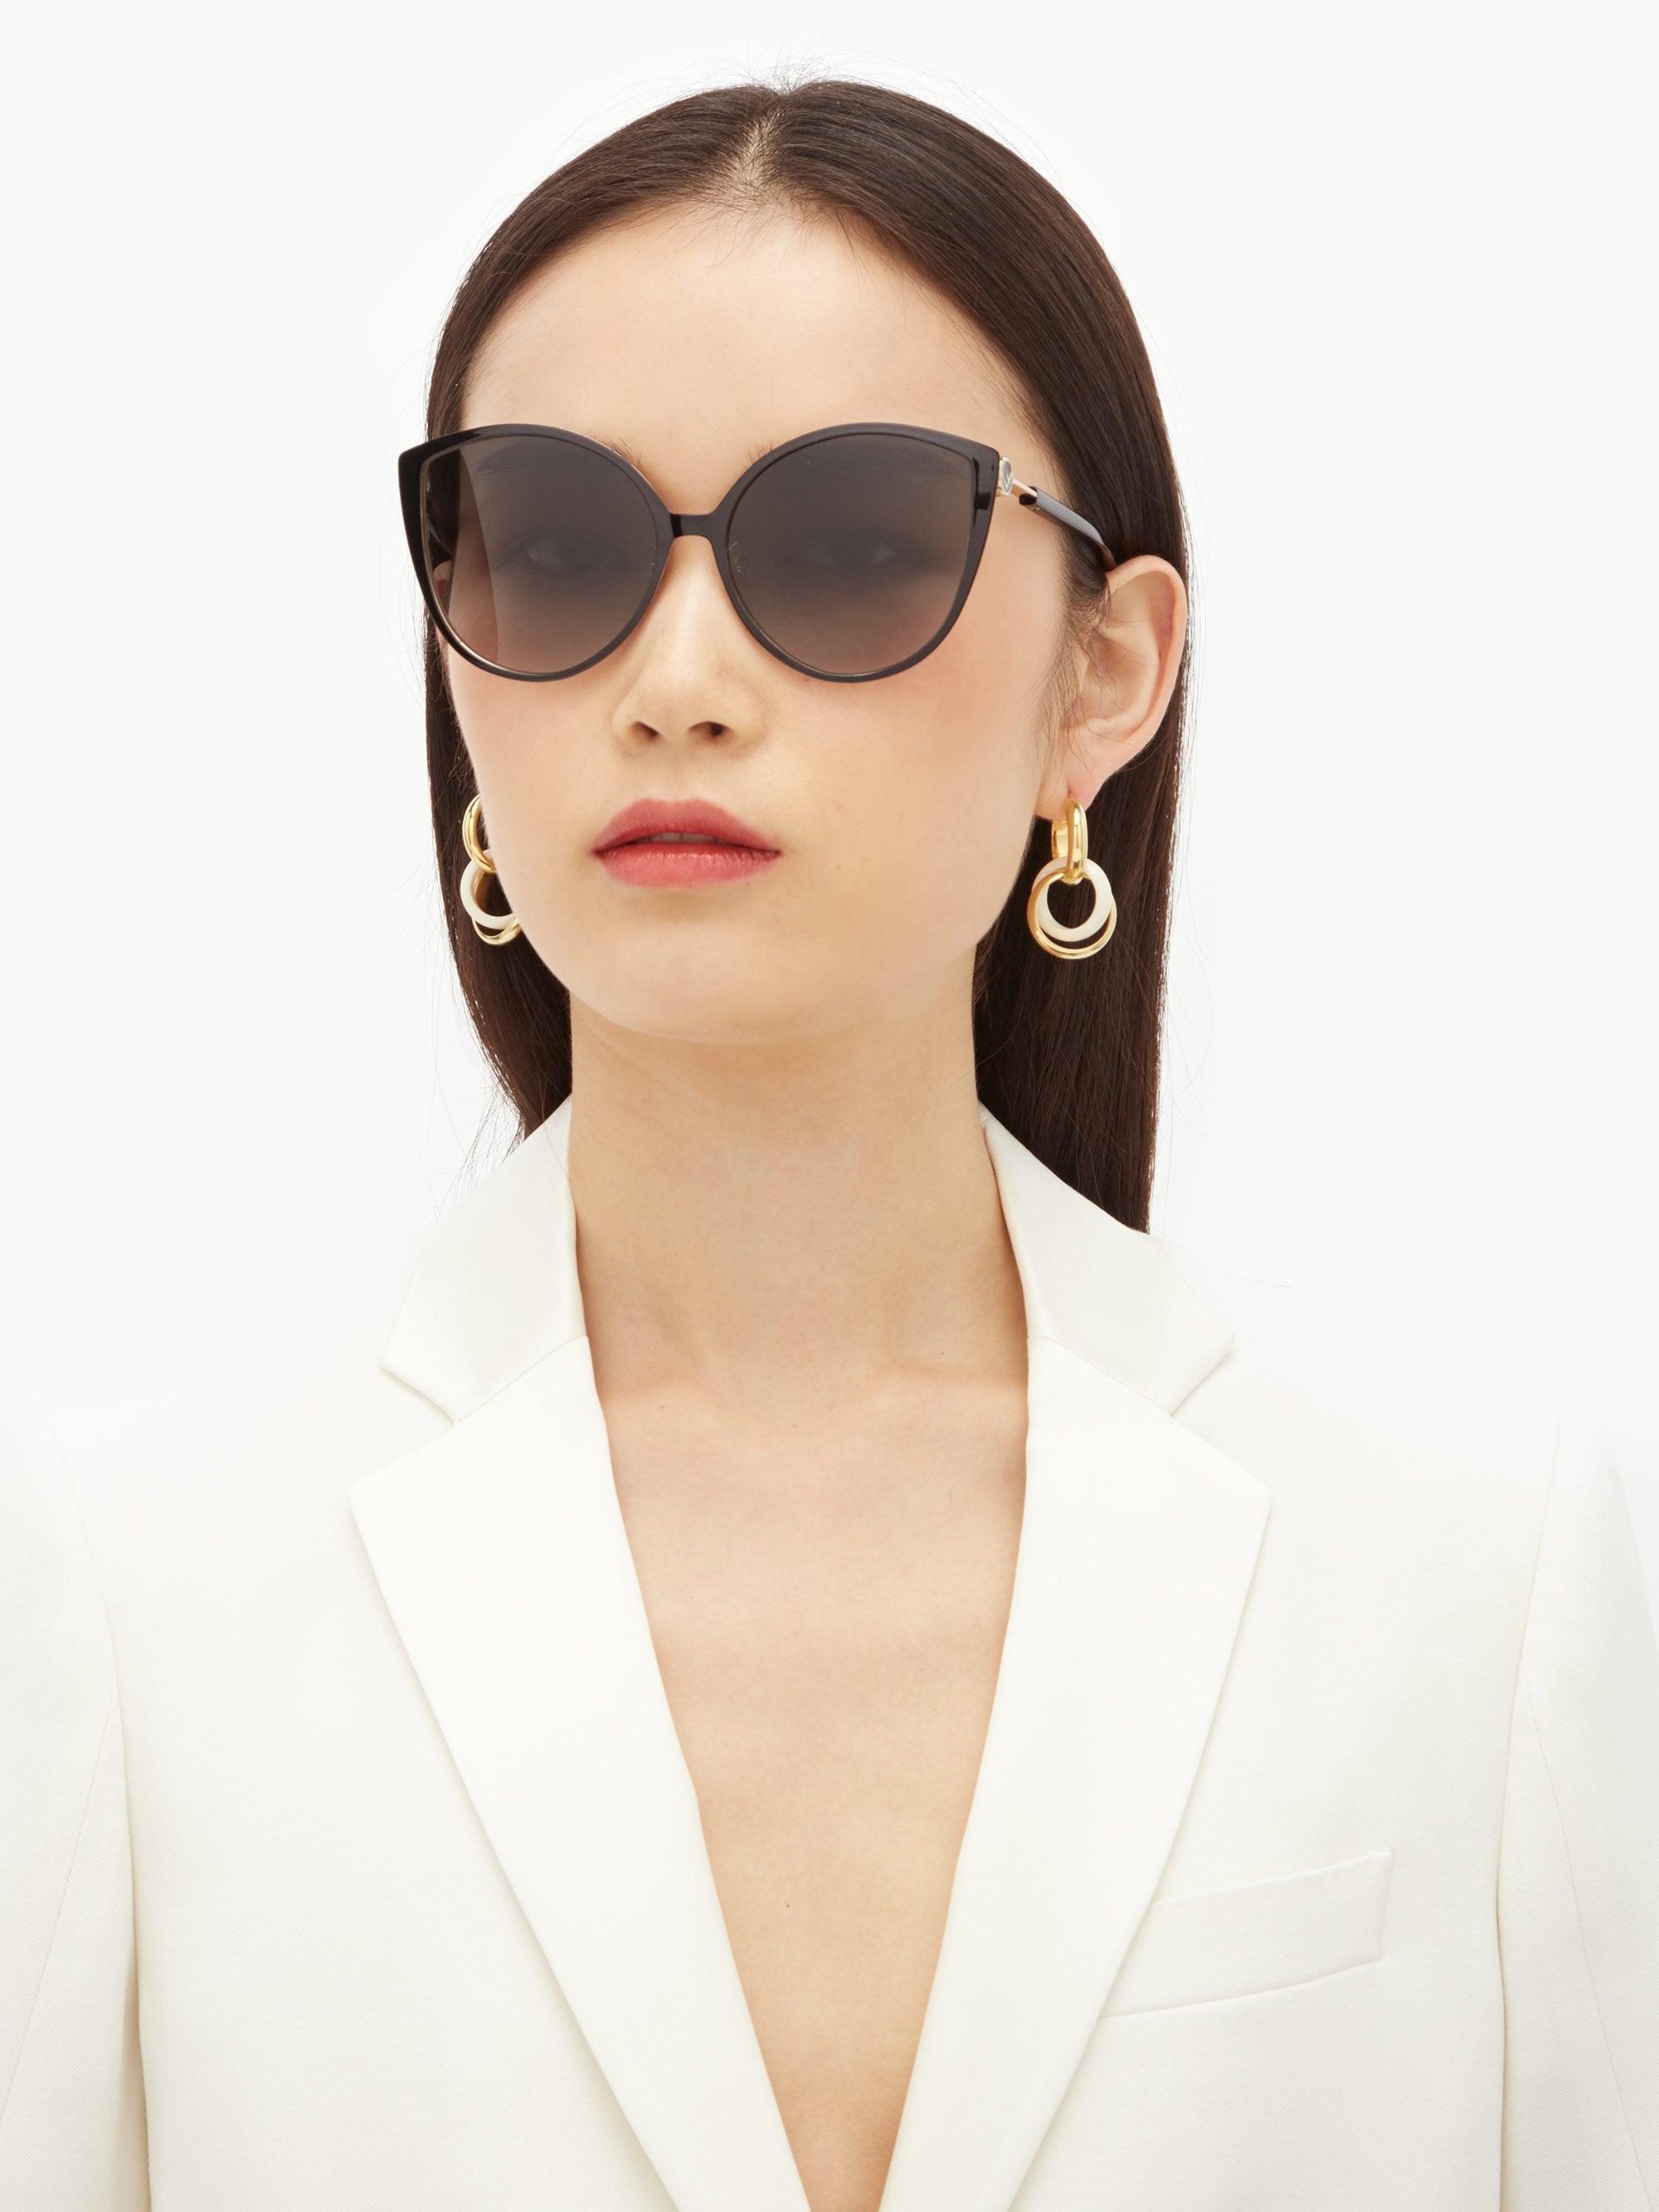 Optical 88 Singapore - Cat-eye Fendi optical frames crafted from havana  acetate with an exclusive FF pattern. Decorated with a distinctive metal  trim on the front, the feminine profile is paired with